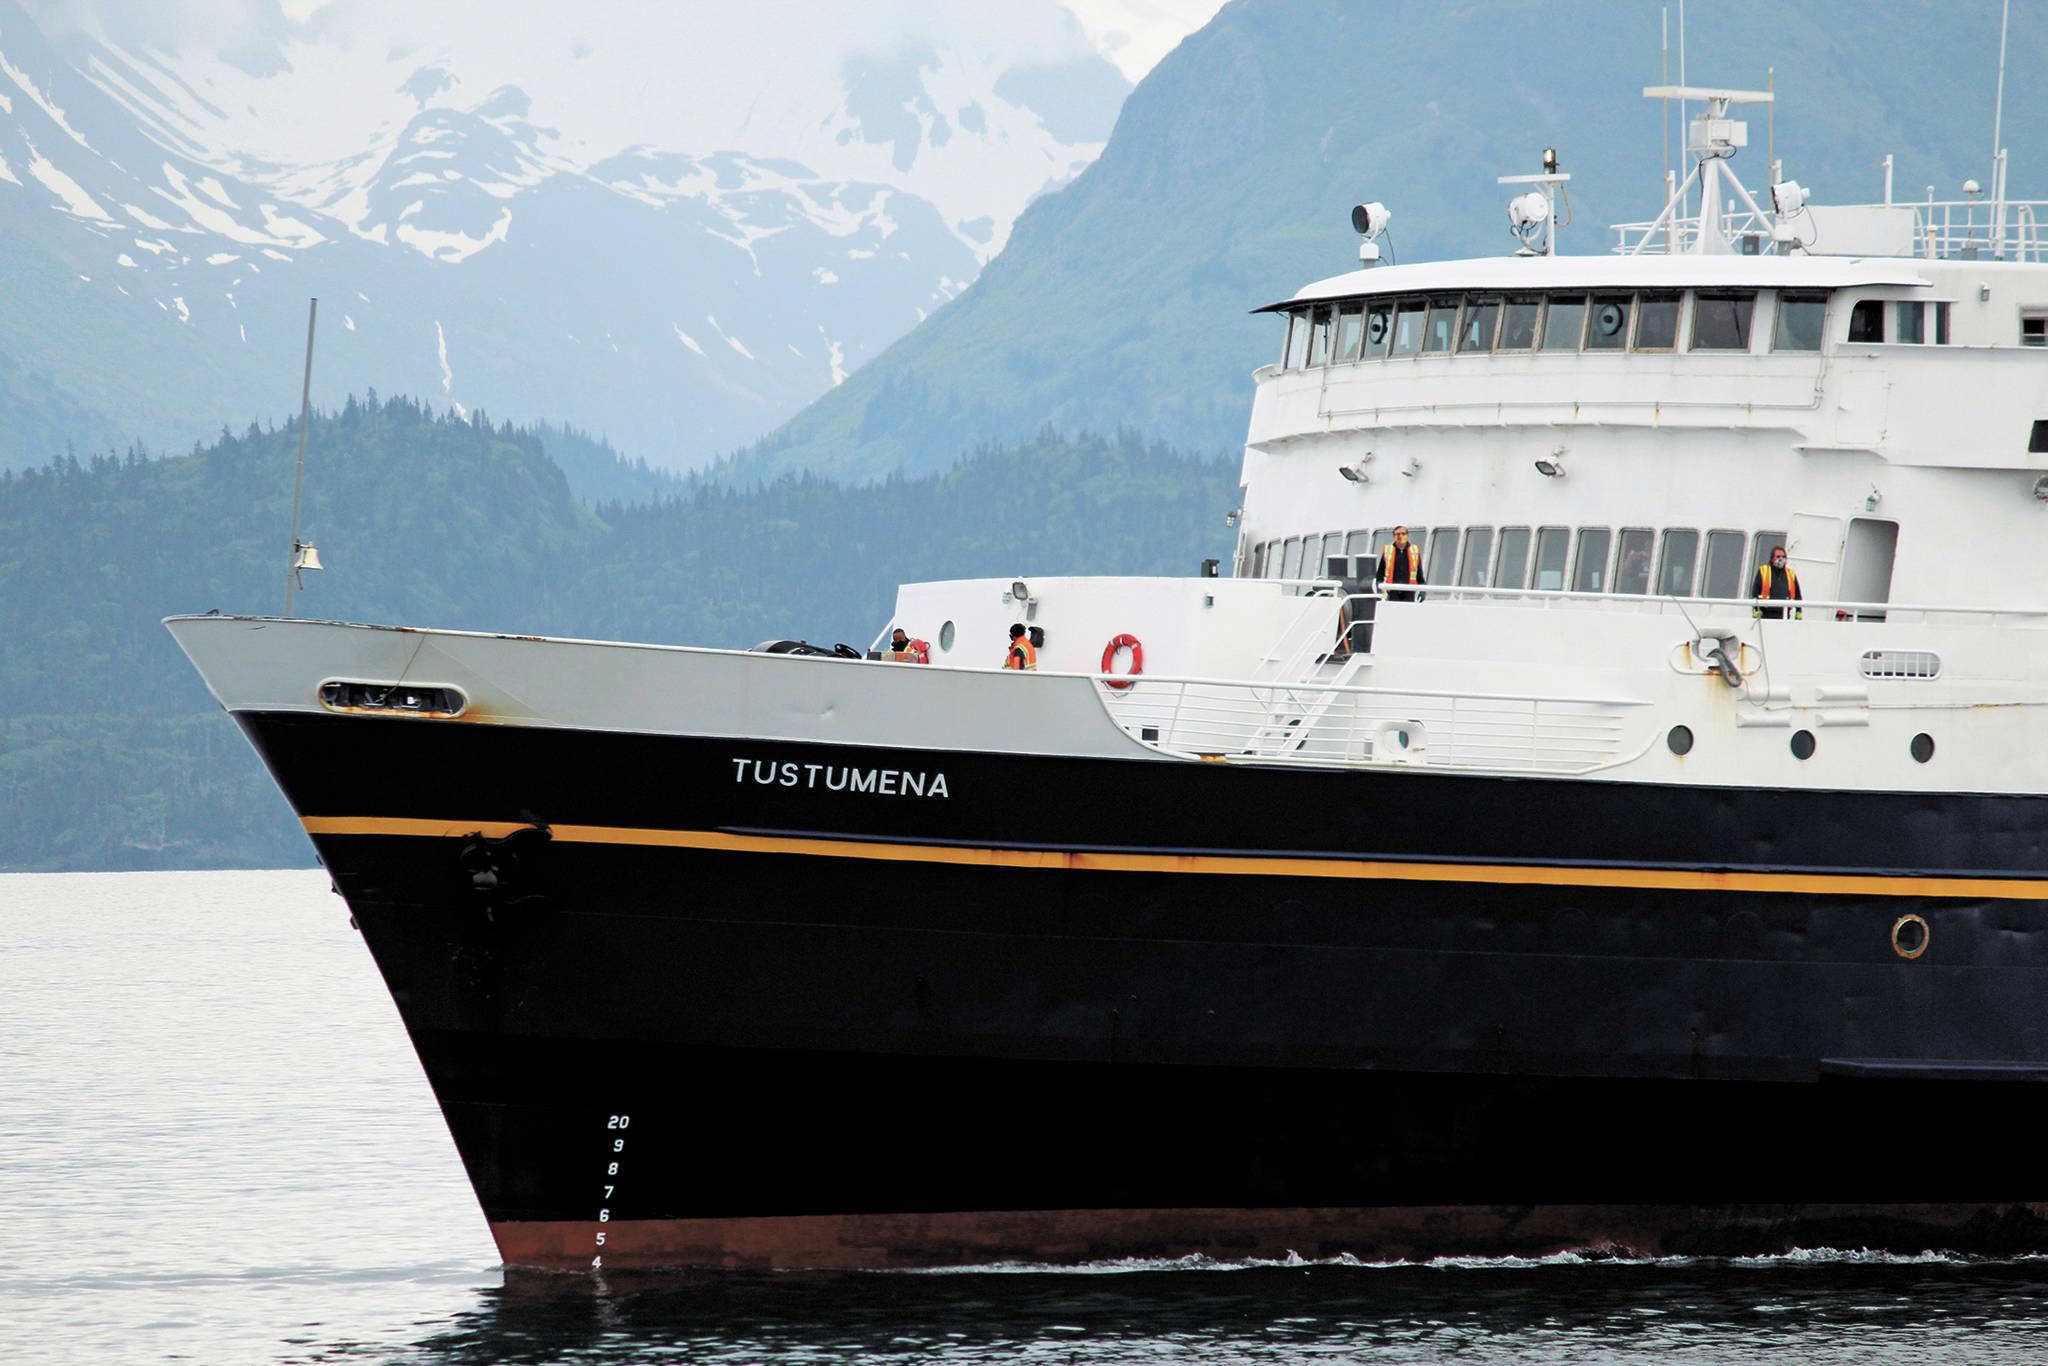 Crew members move about the bow of the M/V Tustumena as it pulls into the Homer Harbor on Monday, June 8, 2020 in Homer, Alaska. A member of the crew tested positive for COVID-19 on Saturday when the state ferry was docked in Dutch Harbor, and most of the crew and six passengers who had boarded in Homer were quarantined while the ship returned. Local health workers performed COVID-19 tests on the crew and passengers upon docking, and they were only allowed to disembark if they had private transportation to their final quarantine destination. (Photo by Megan Pacer/Homer News)